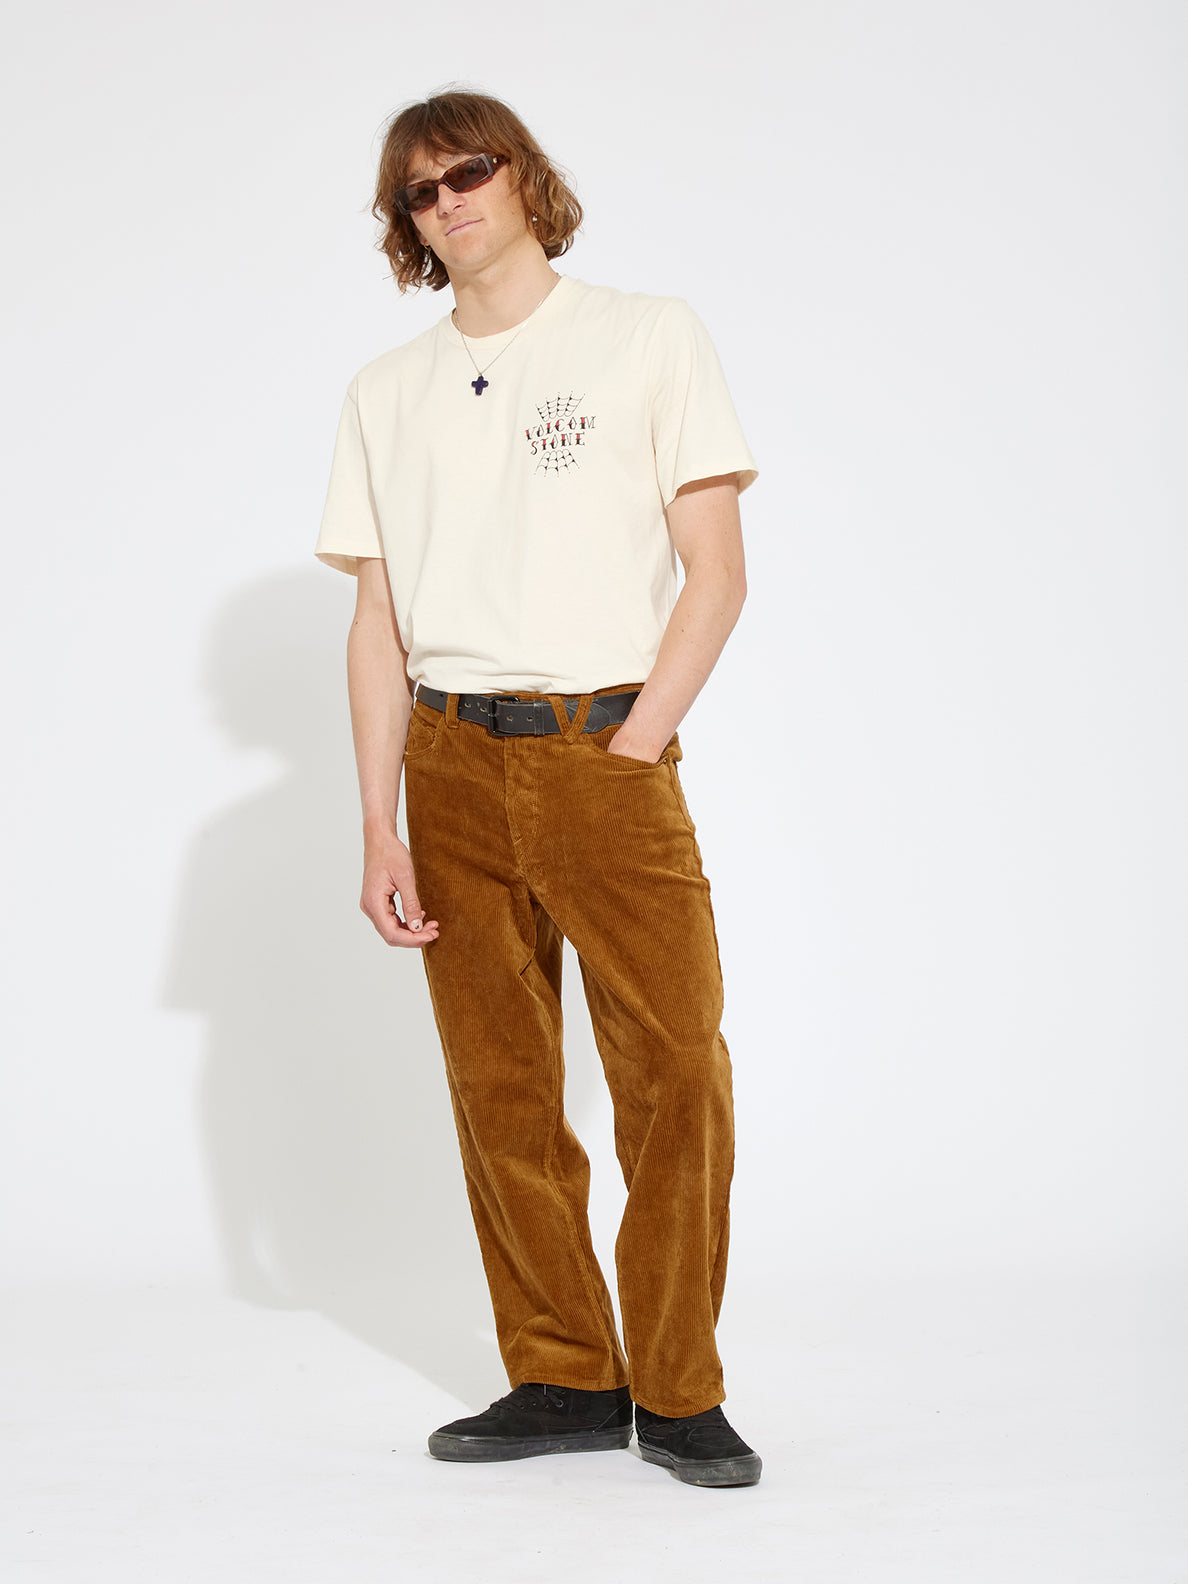 2022 Corduroy Trousers All Season Women Solid Button Fly Pocket